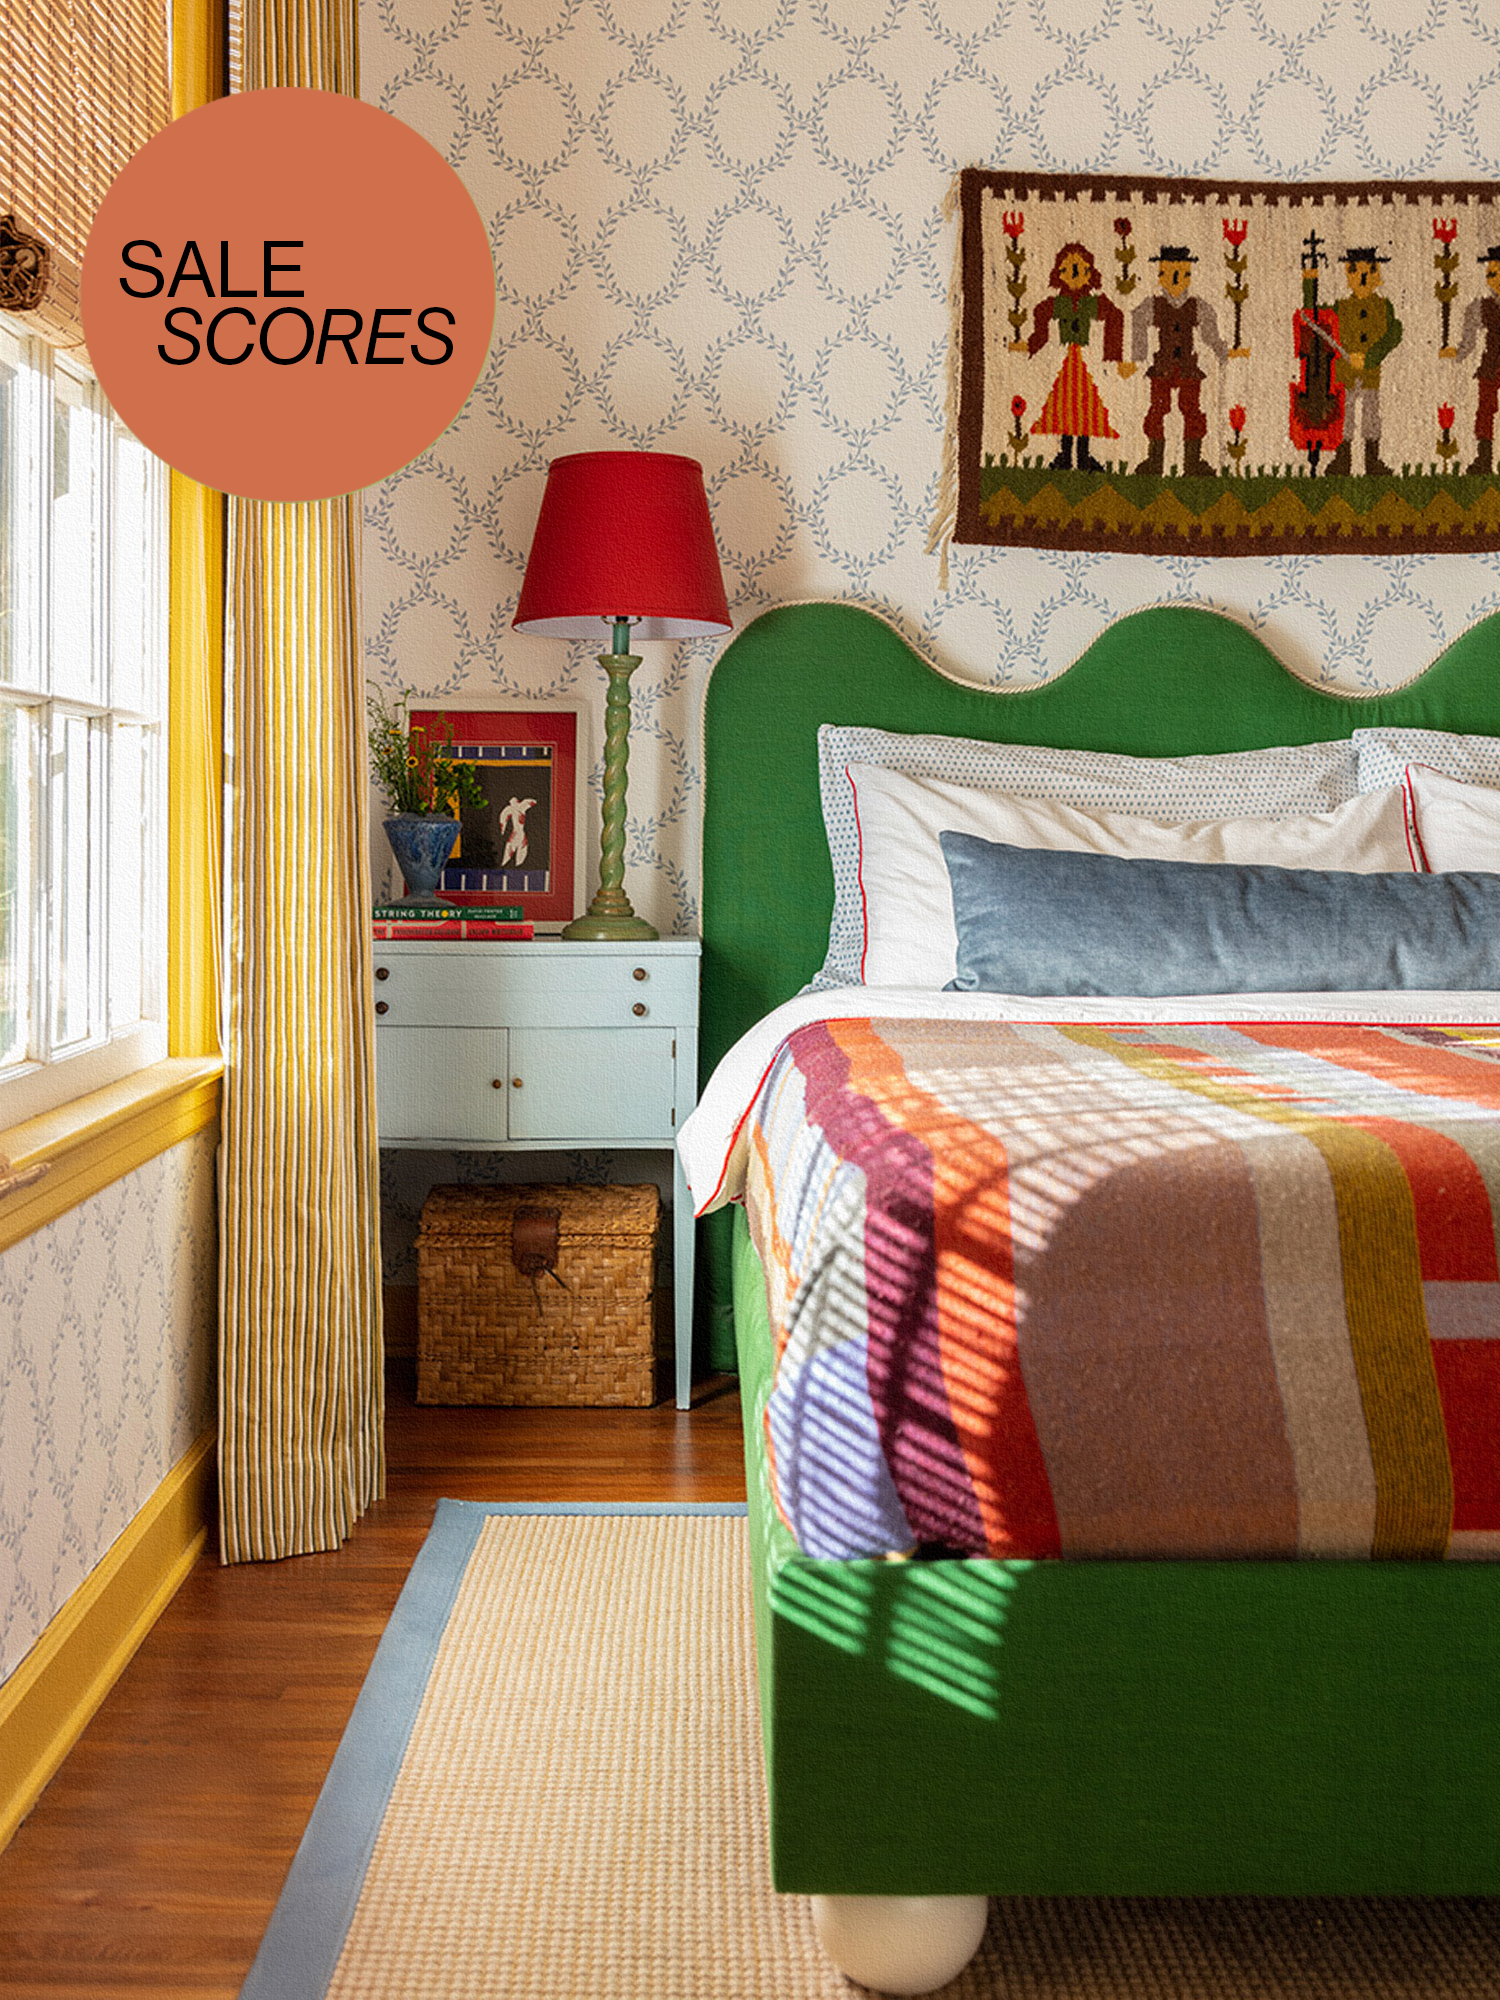 Schoolhouse Stillwater Floral Quilt Review - Tested, Photos